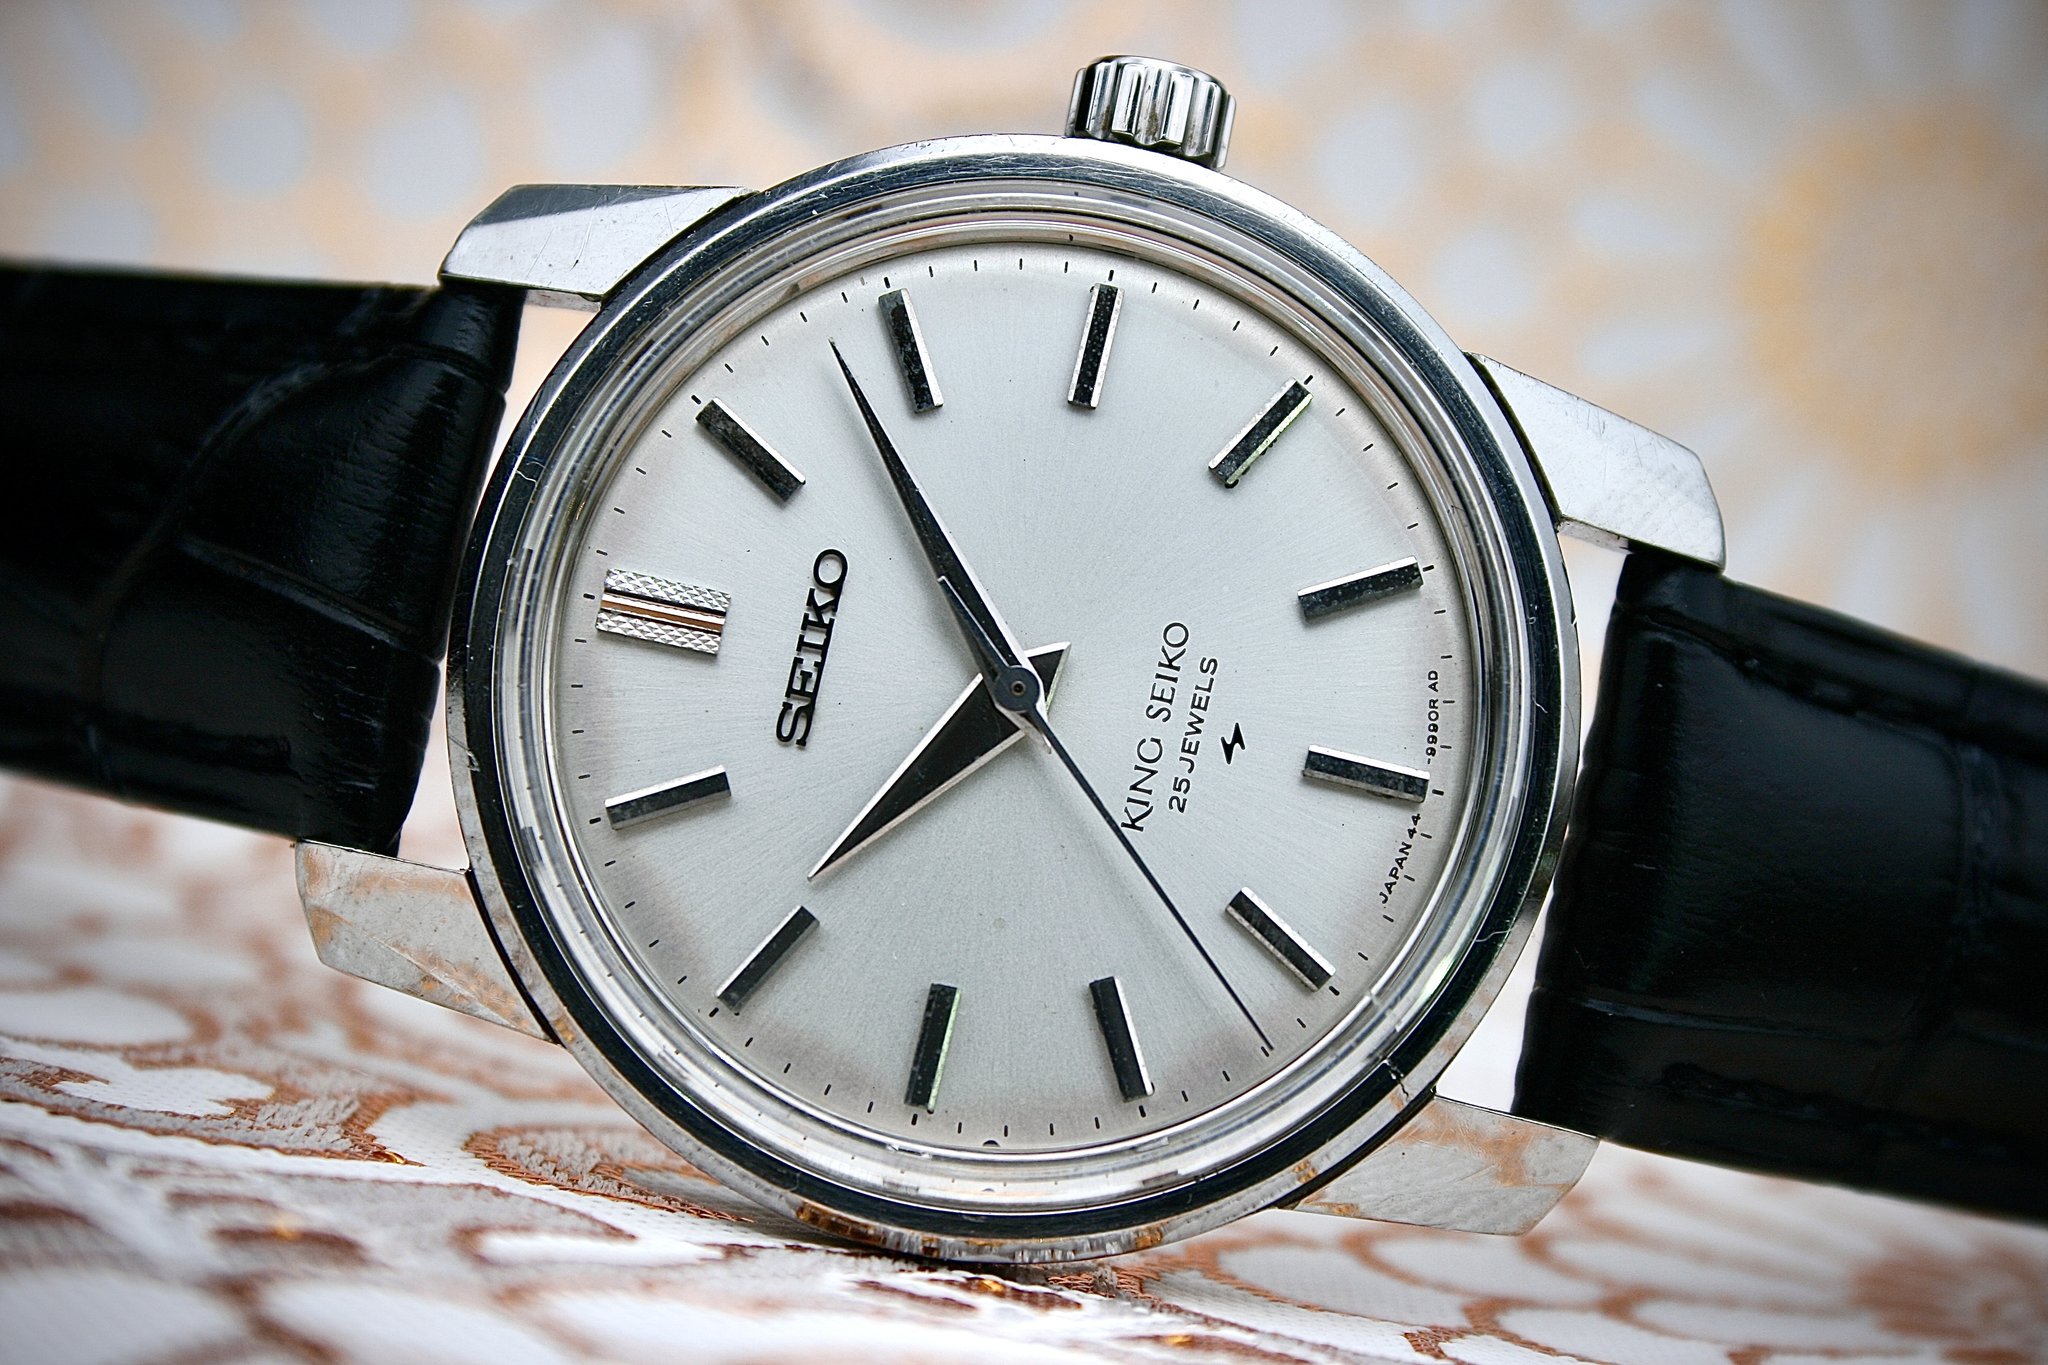 Seiko Re-Creation of King Seiko KSK SJE083 - Hands-On Review, Price